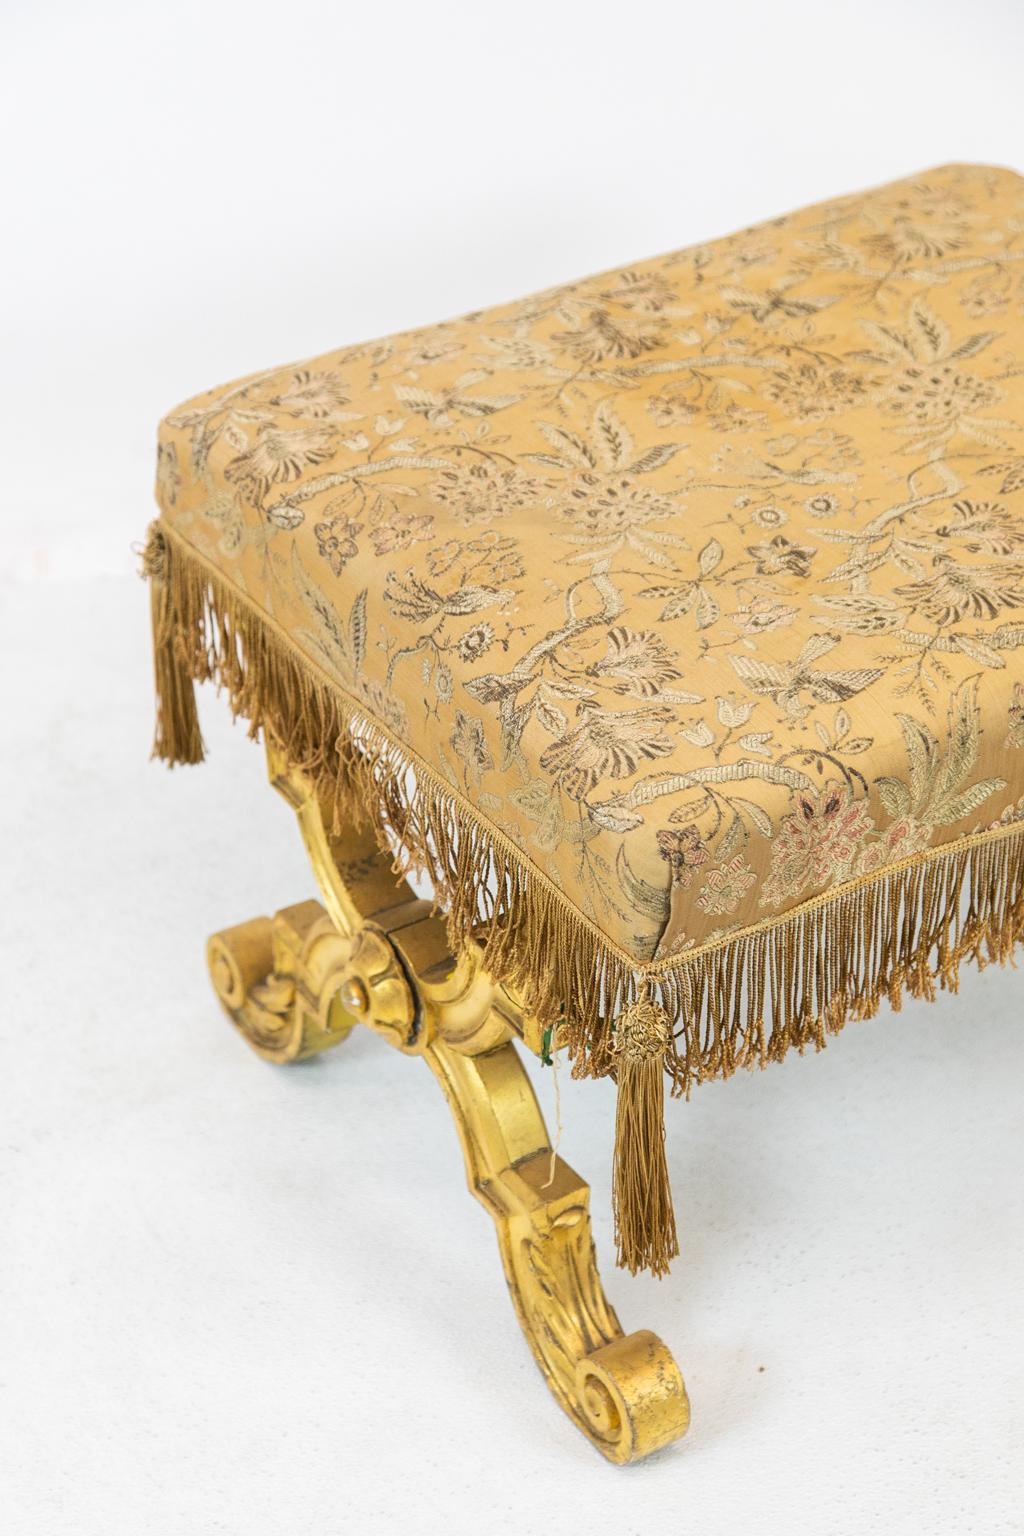 English gilt stretcher stool has a turned spiral support stretcher. The upholstery is original and has wear and light stains.
 